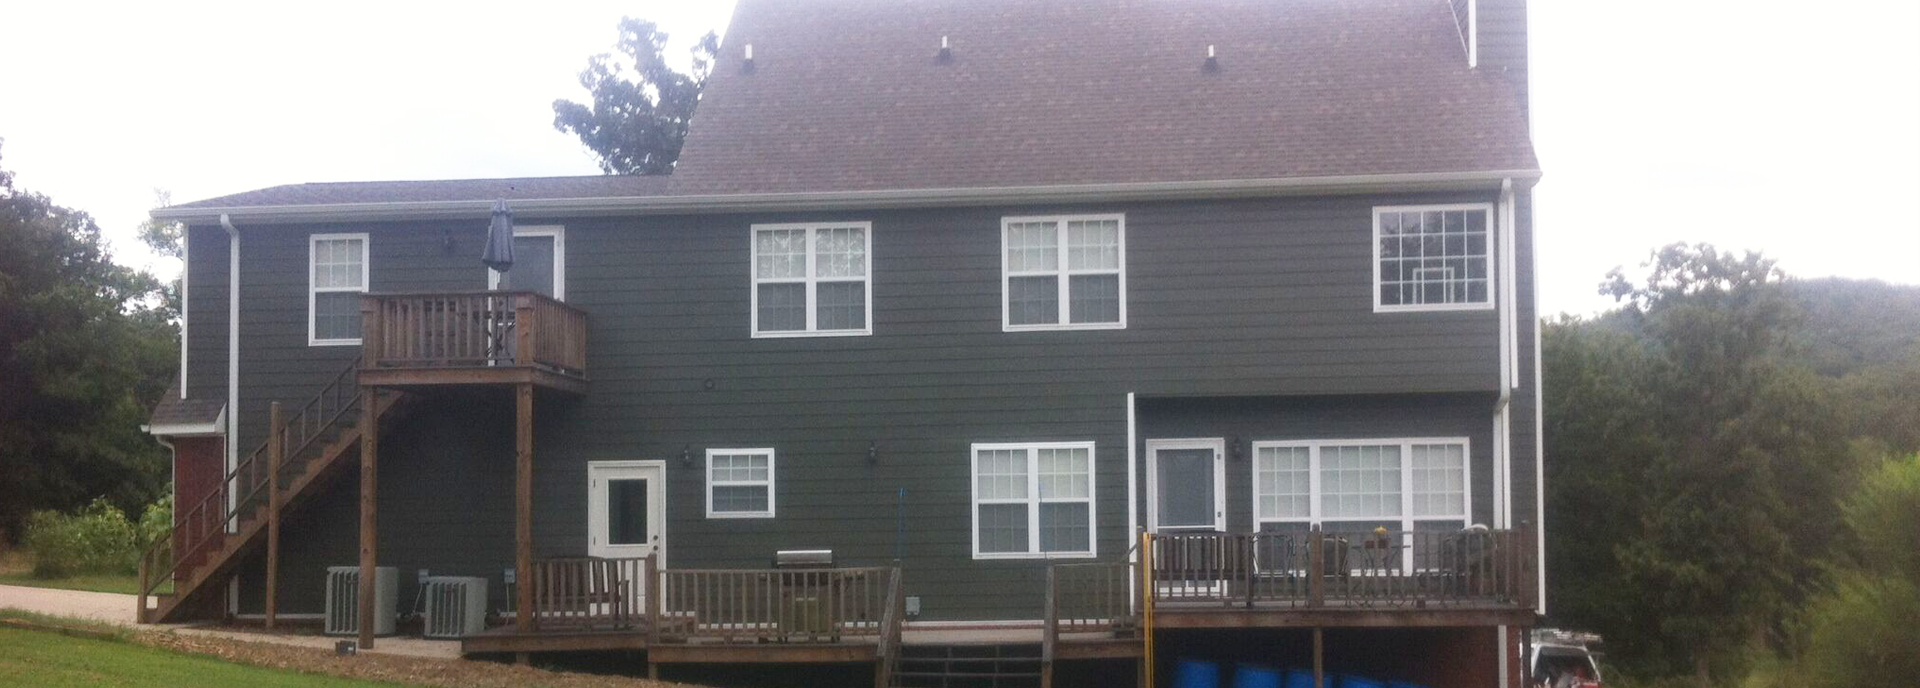 Exterior house painting by CertaPro painters in Fayetteville, AR